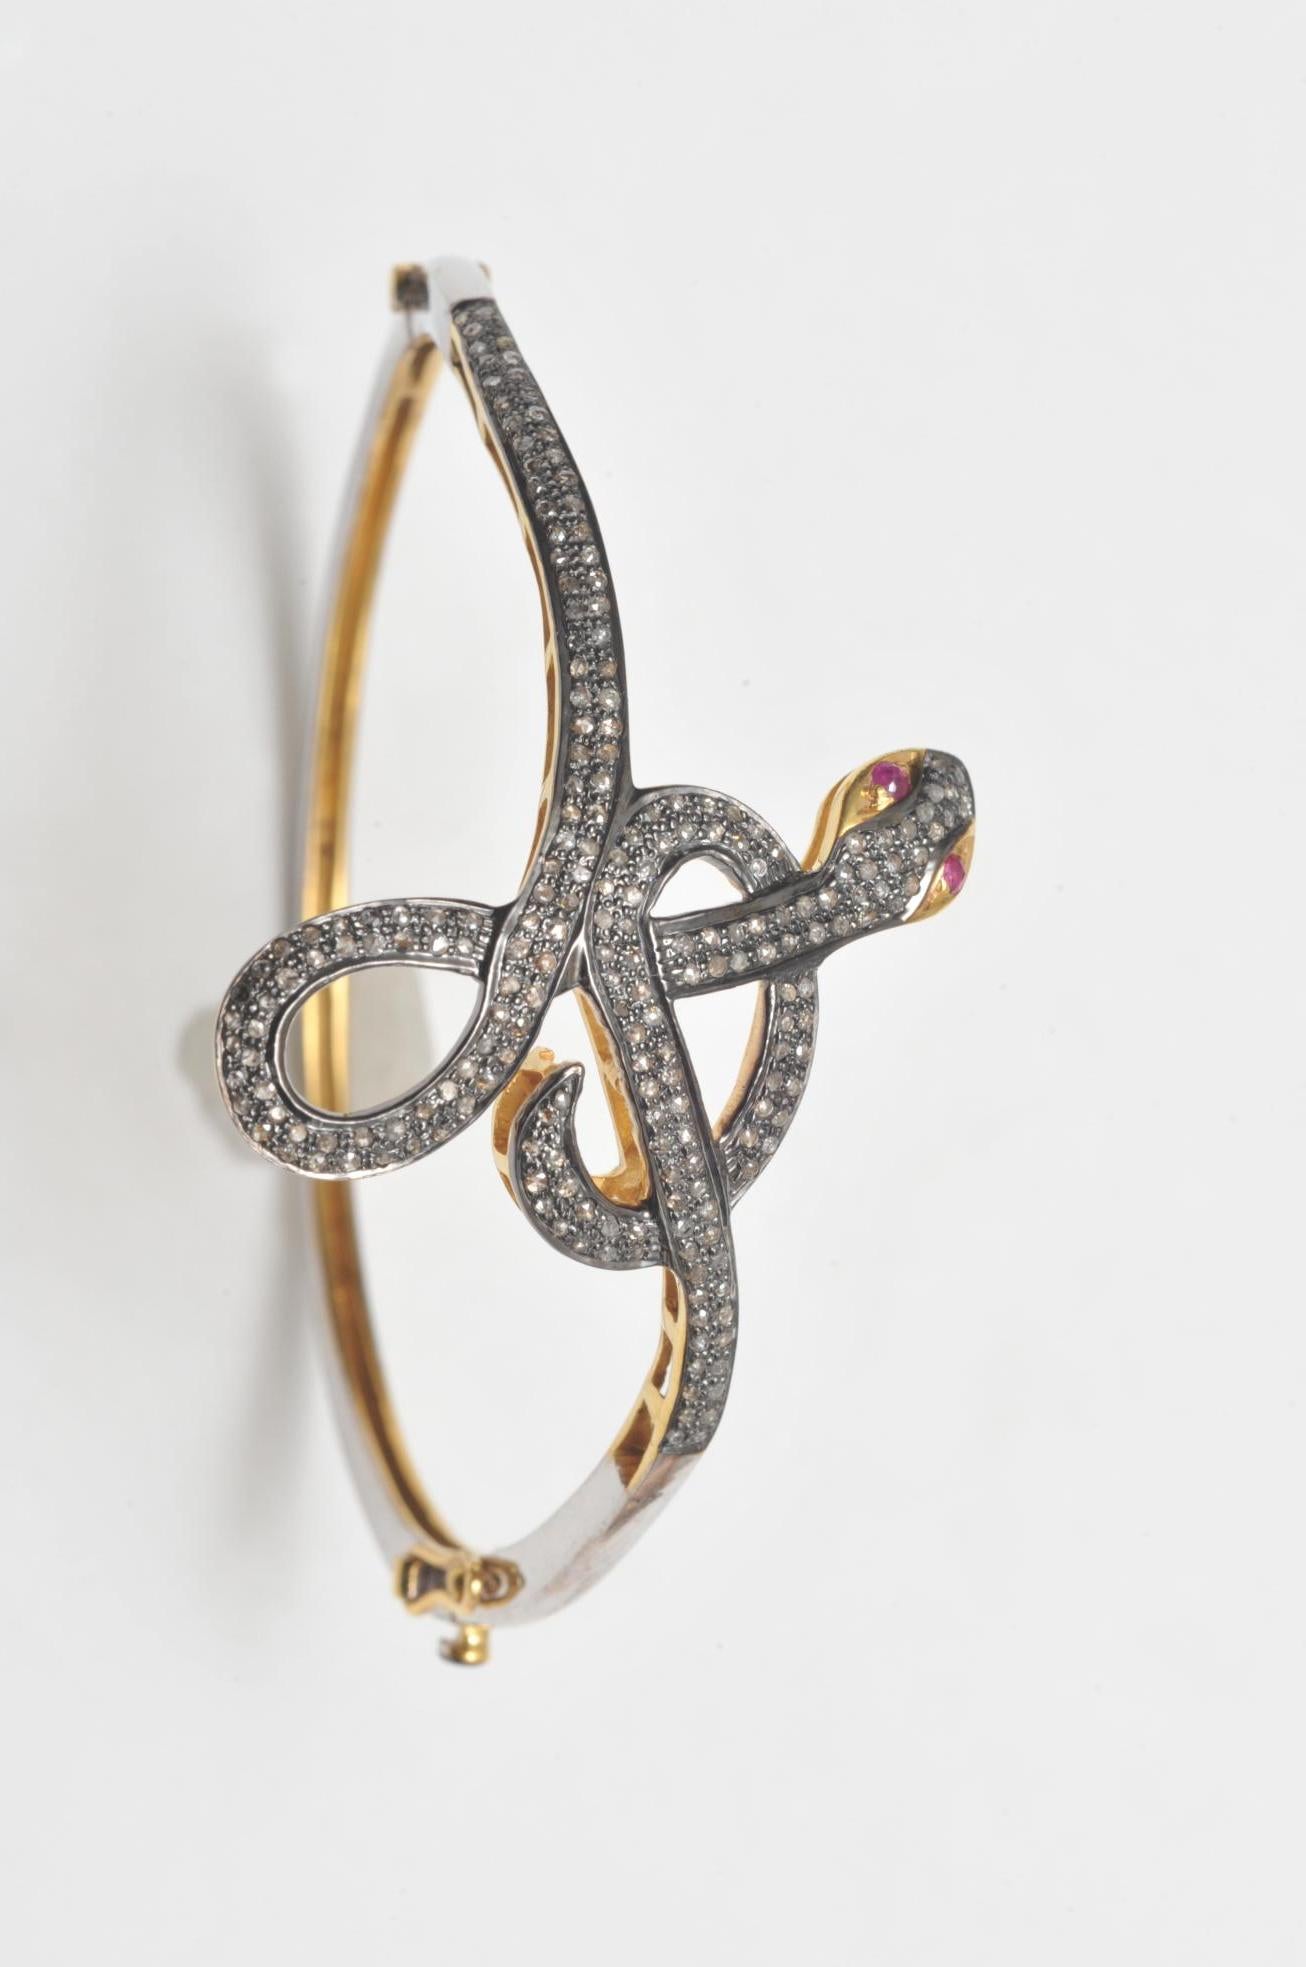 Unusual coiled snake bracelet with pave`-set diamonds and ruby eyes.  18K vermeil along the sides.  Oval shape to keep the diamonds and design on the top of the wrist.  Simple sterling along the back.  Diamond push clasp with two safeties.  Interior